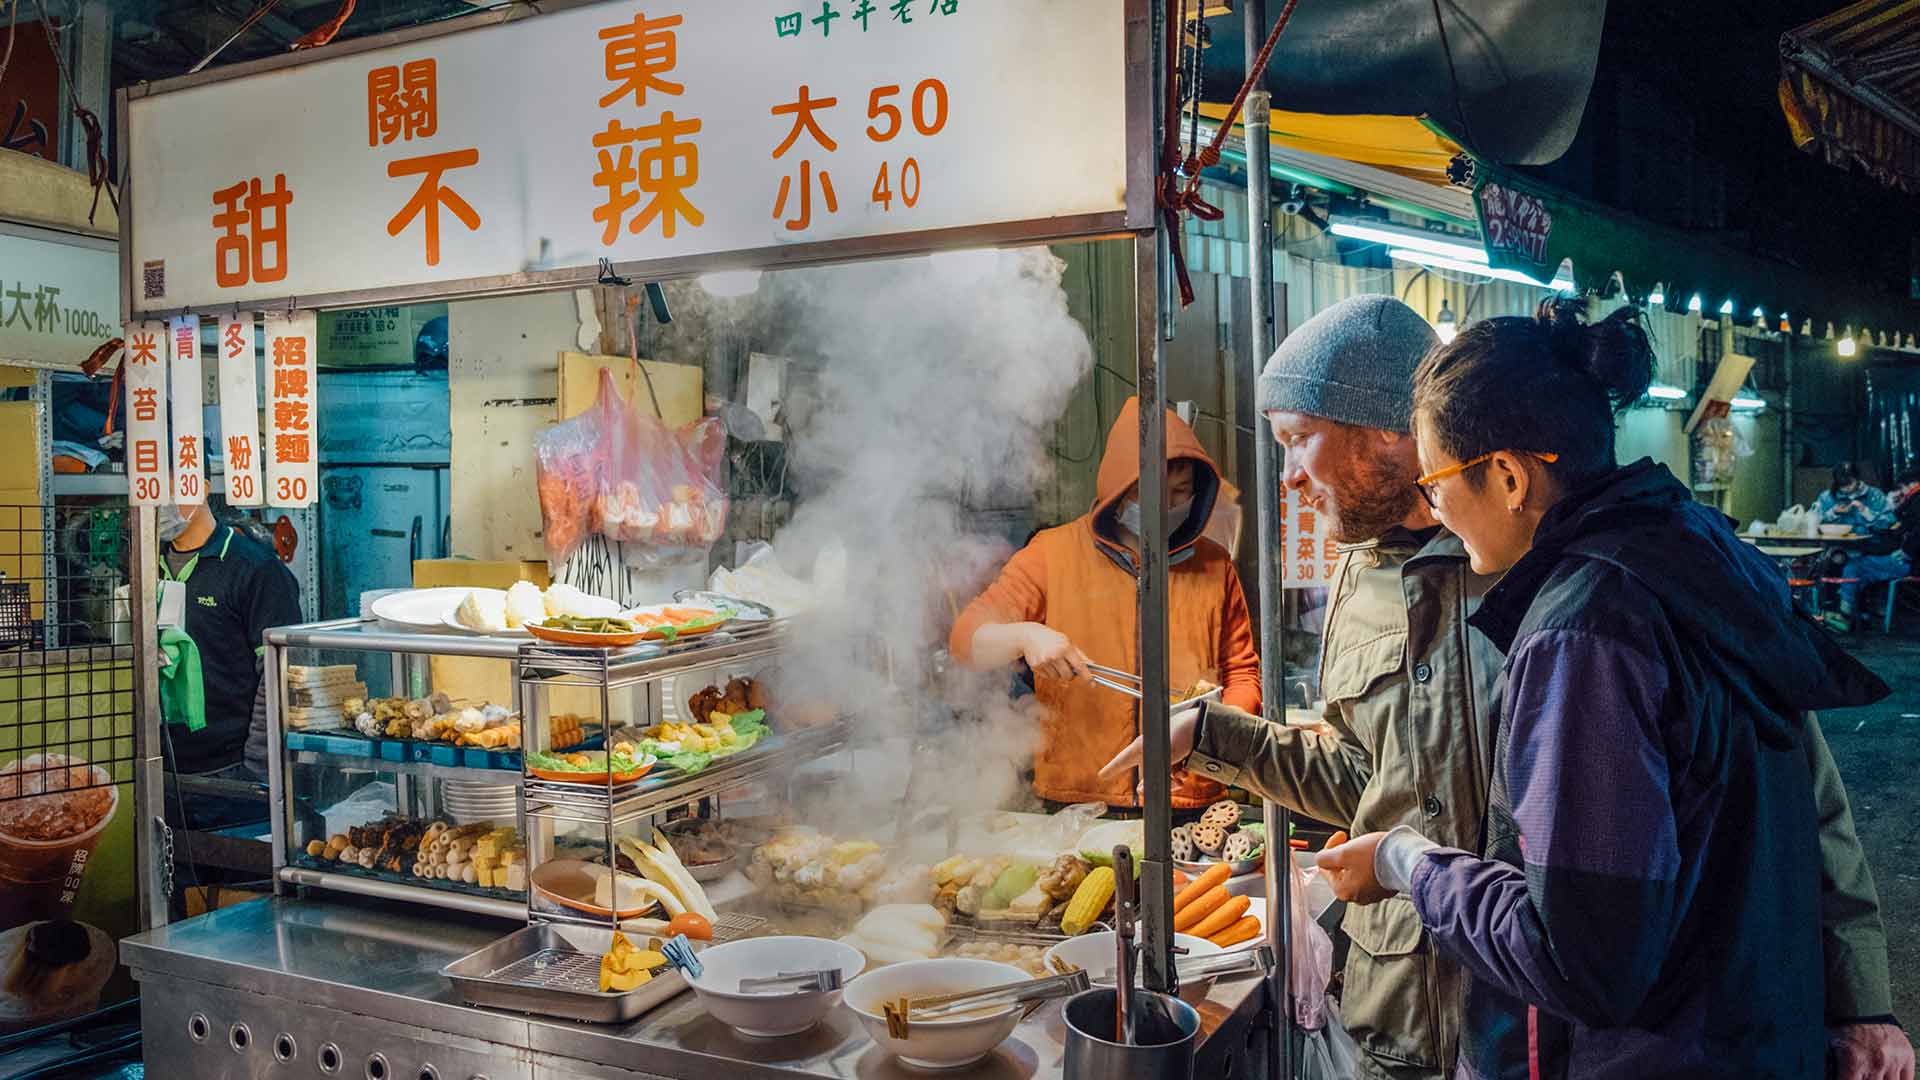 Taiwanese street vendor selling food to customers